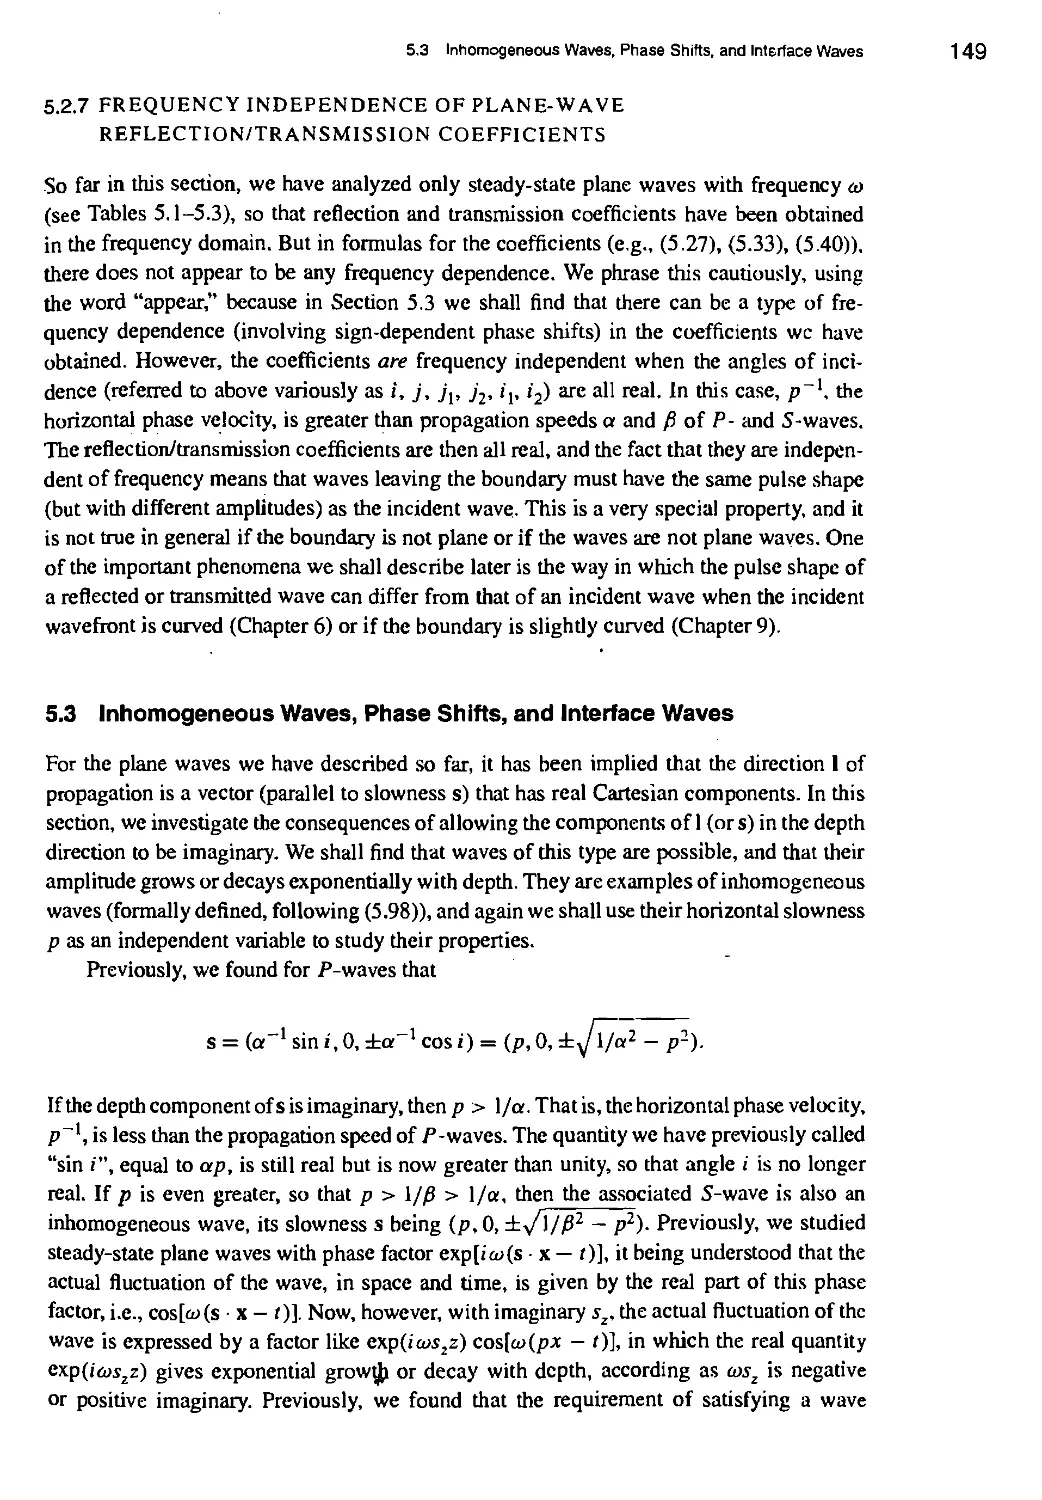 5.2.7 Frequency independence of plane-wave reflection/transmission coefficients
5.3 Inhomogeneous Waves, Phase Shifts, and Interface Waves